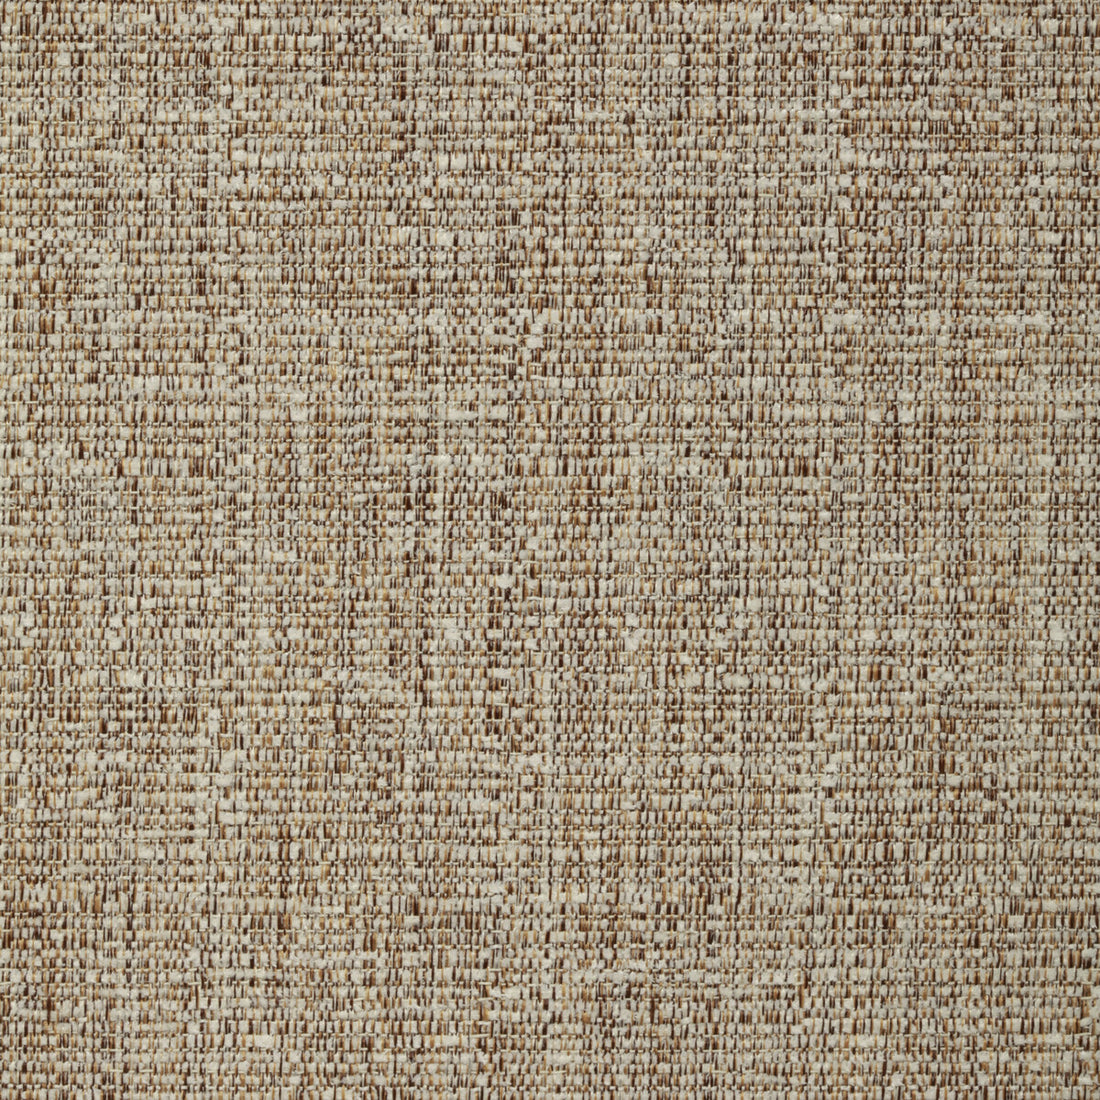 Kravet Contract fabric in 35128-16 color - pattern 35128.16.0 - by Kravet Contract in the Crypton Incase collection